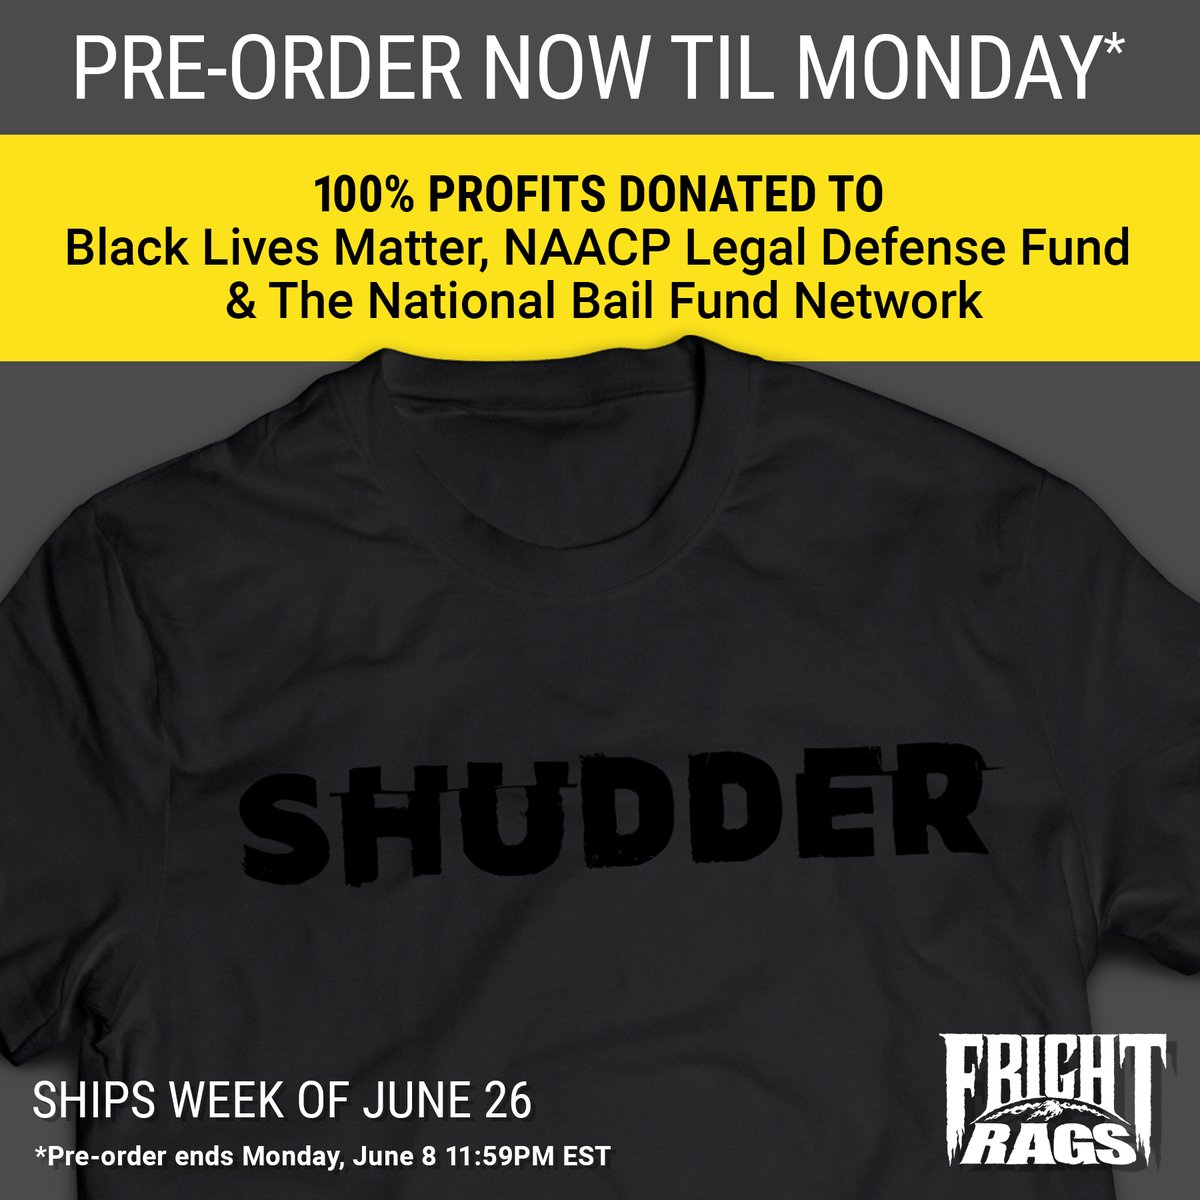 Order this limited-edition Shudder shirt from @frightrags to support @Blklivesmatter, @NAACP_LDF and @bailfundnetwork. 100% of all profits donated. bit.ly/30bGbfV